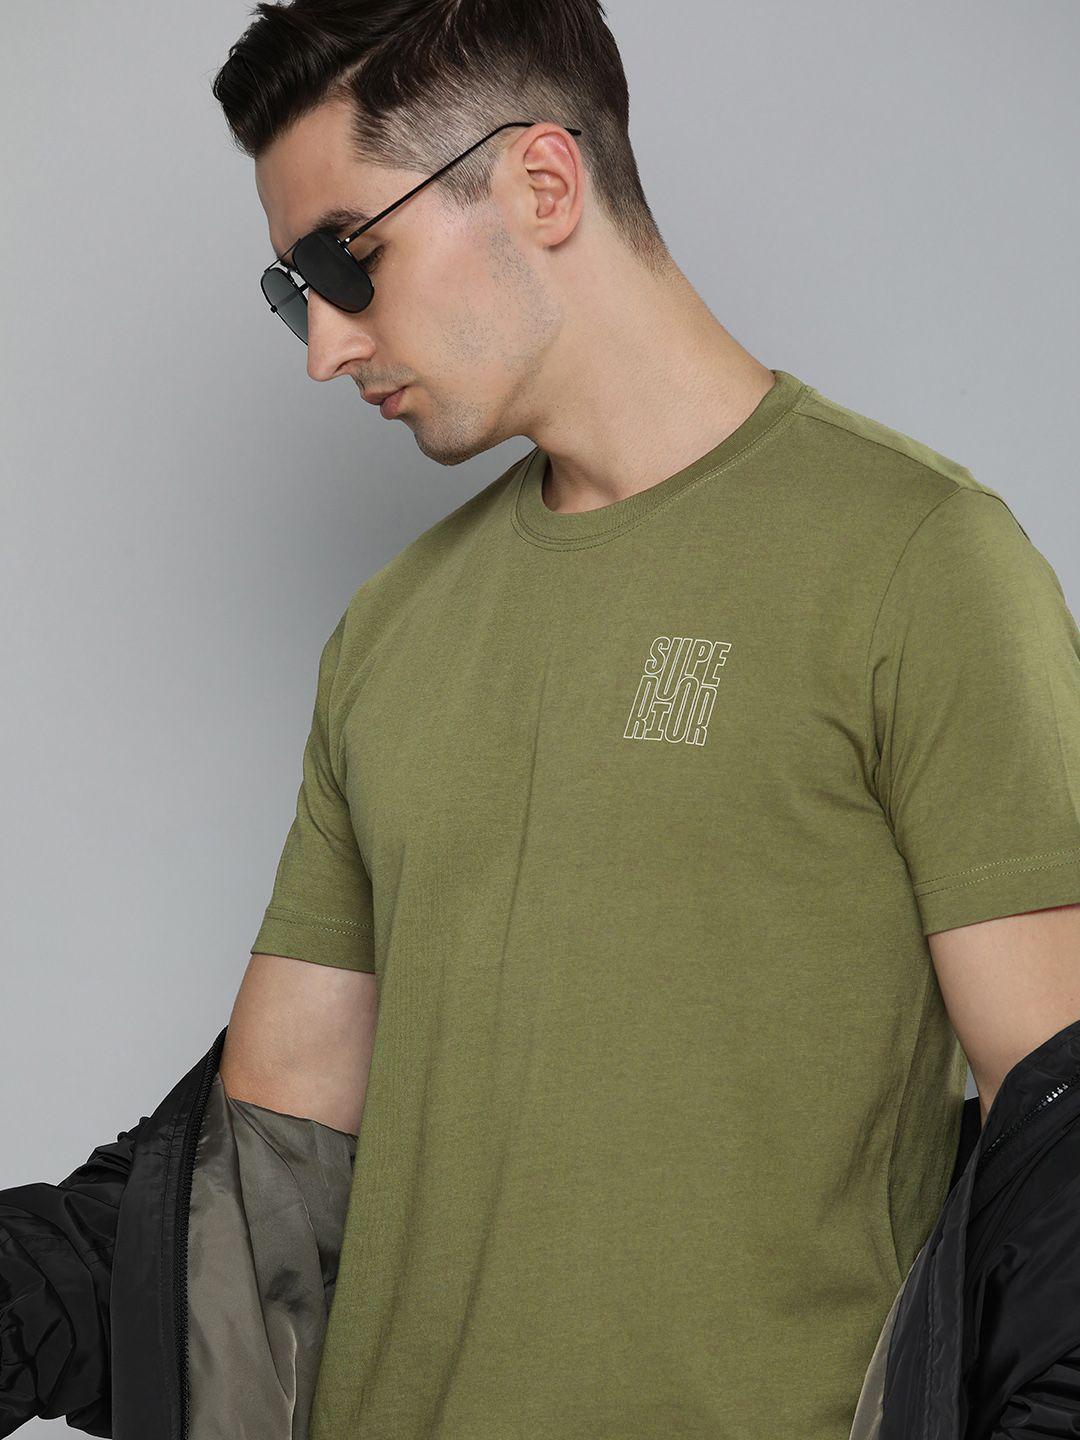 here&now men olive green pure cotton round neck t-shirt